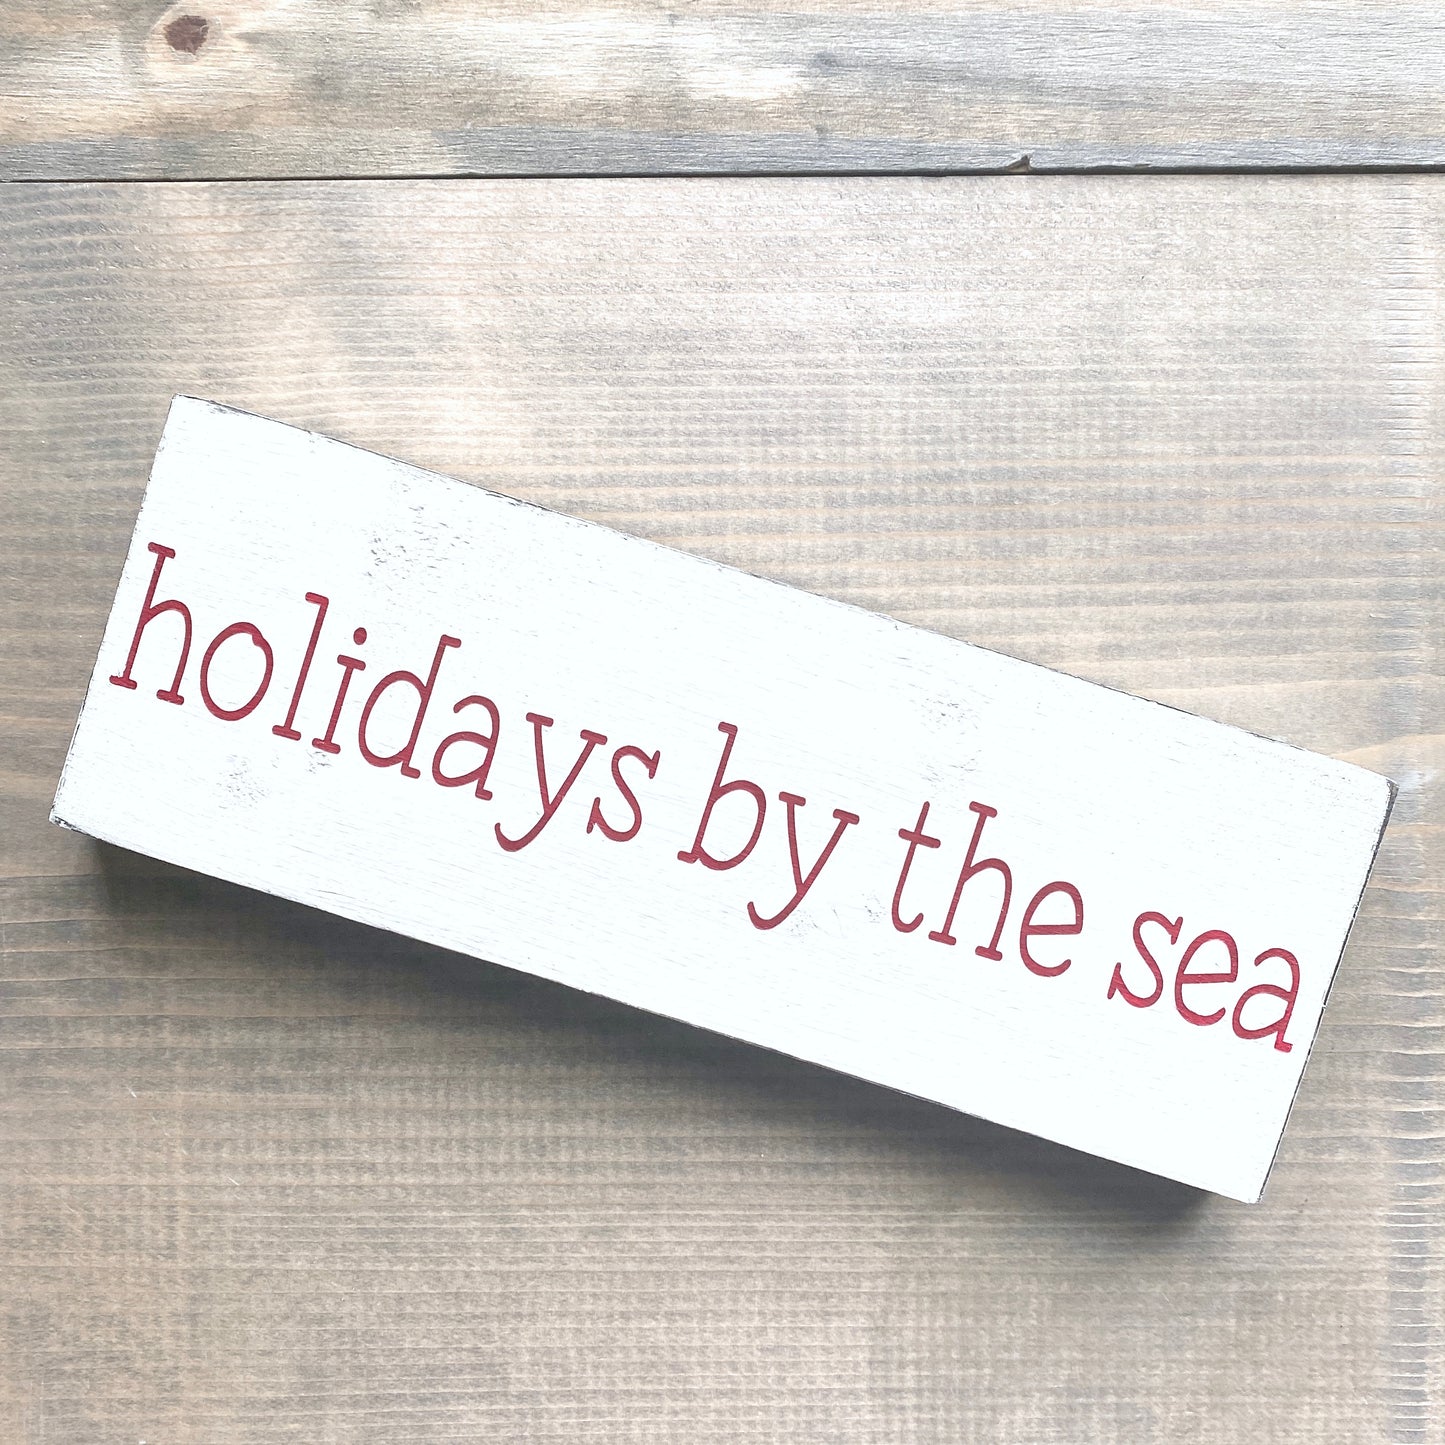 Coastal Christmas Decor, Anchored Soul Designs holidays by the sea Christmas wood sign white background with red design, beach house holiday decor coastal design